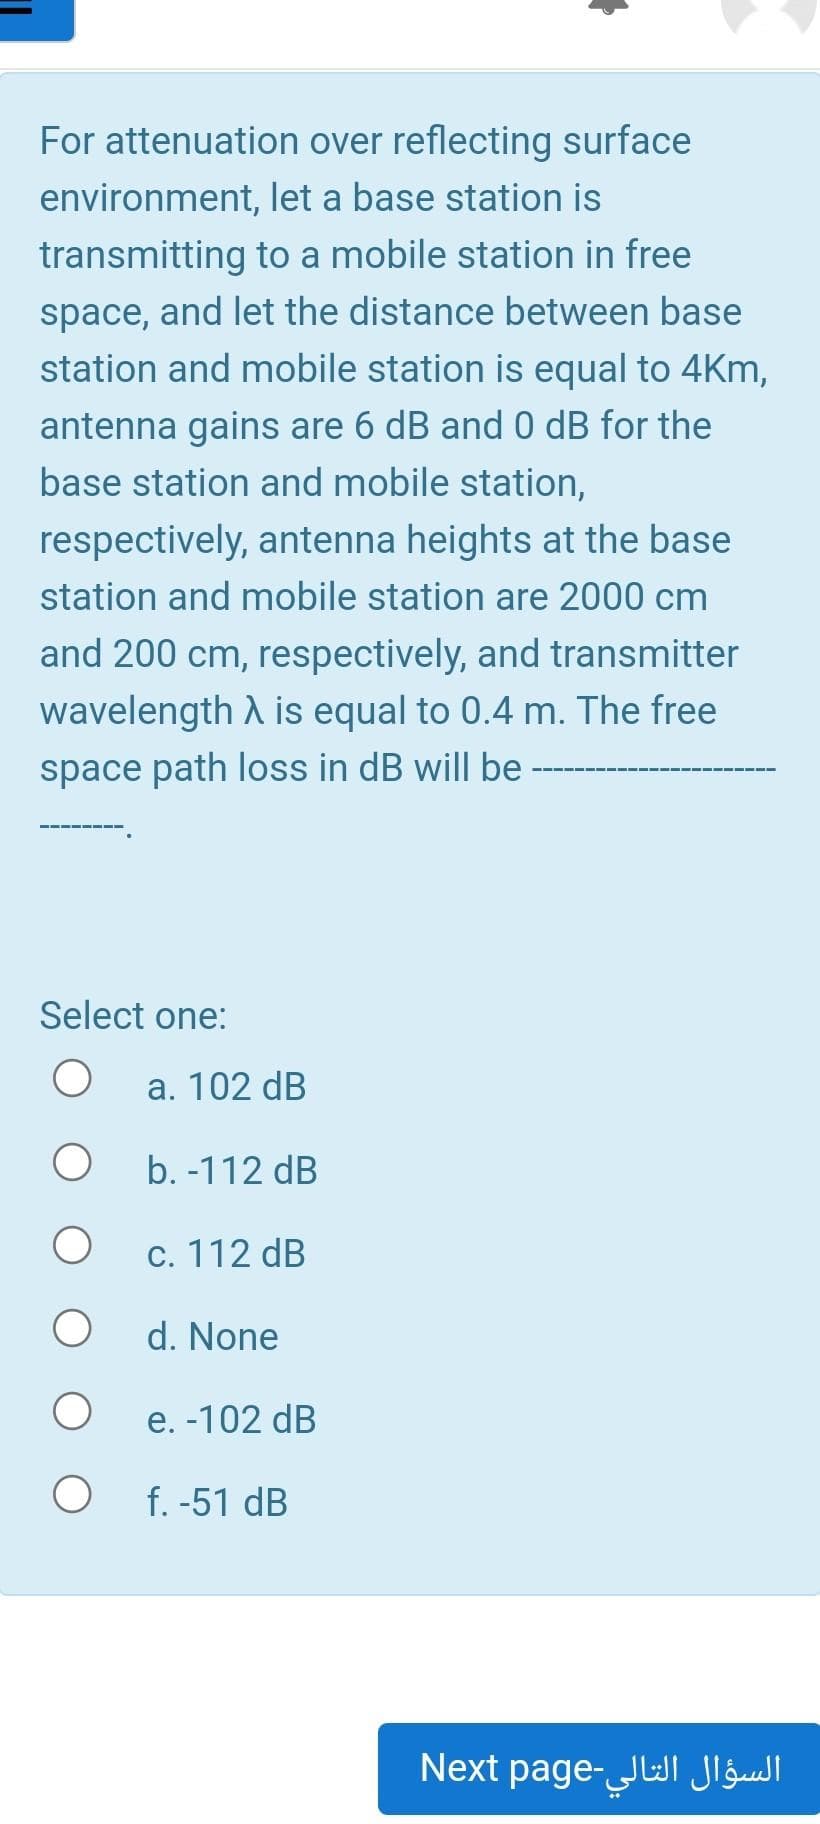 For attenuation over reflecting surface
environment, let a base station is
transmitting to a mobile station in free
space, and let the distance between base
station and mobile station is equal to 4Km,
antenna gains are 6 dB and 0 dB for the
base station and mobile station,
respectively, antenna heights at the base
station and mobile station are 2000 cm
and 200 cm, respectively, and transmitter
wavelength A is equal to 0.4 m. The free
space path loss in dB will be
Select one:
a. 102 dB
b. -112 dB
c. 112 dB
d. None
e. -102 dB
f. -51 dB
السؤال التالي-pageNext
